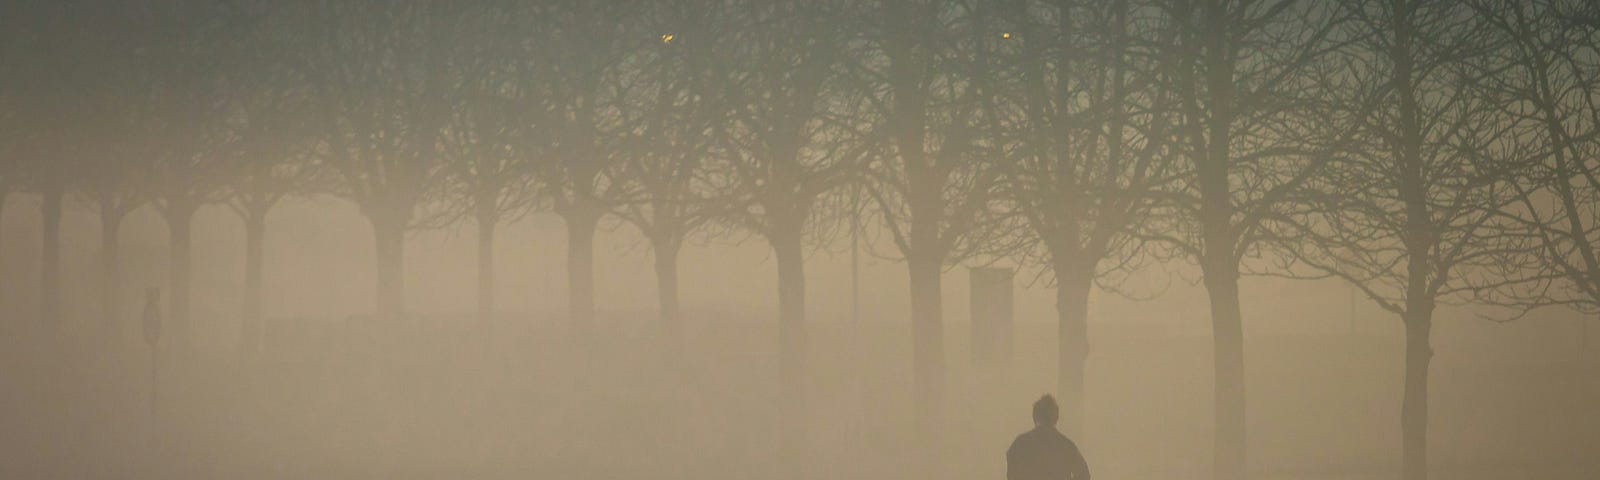 A running man in the haze of sepia tone of trees lines up in front of two faded street lamps.